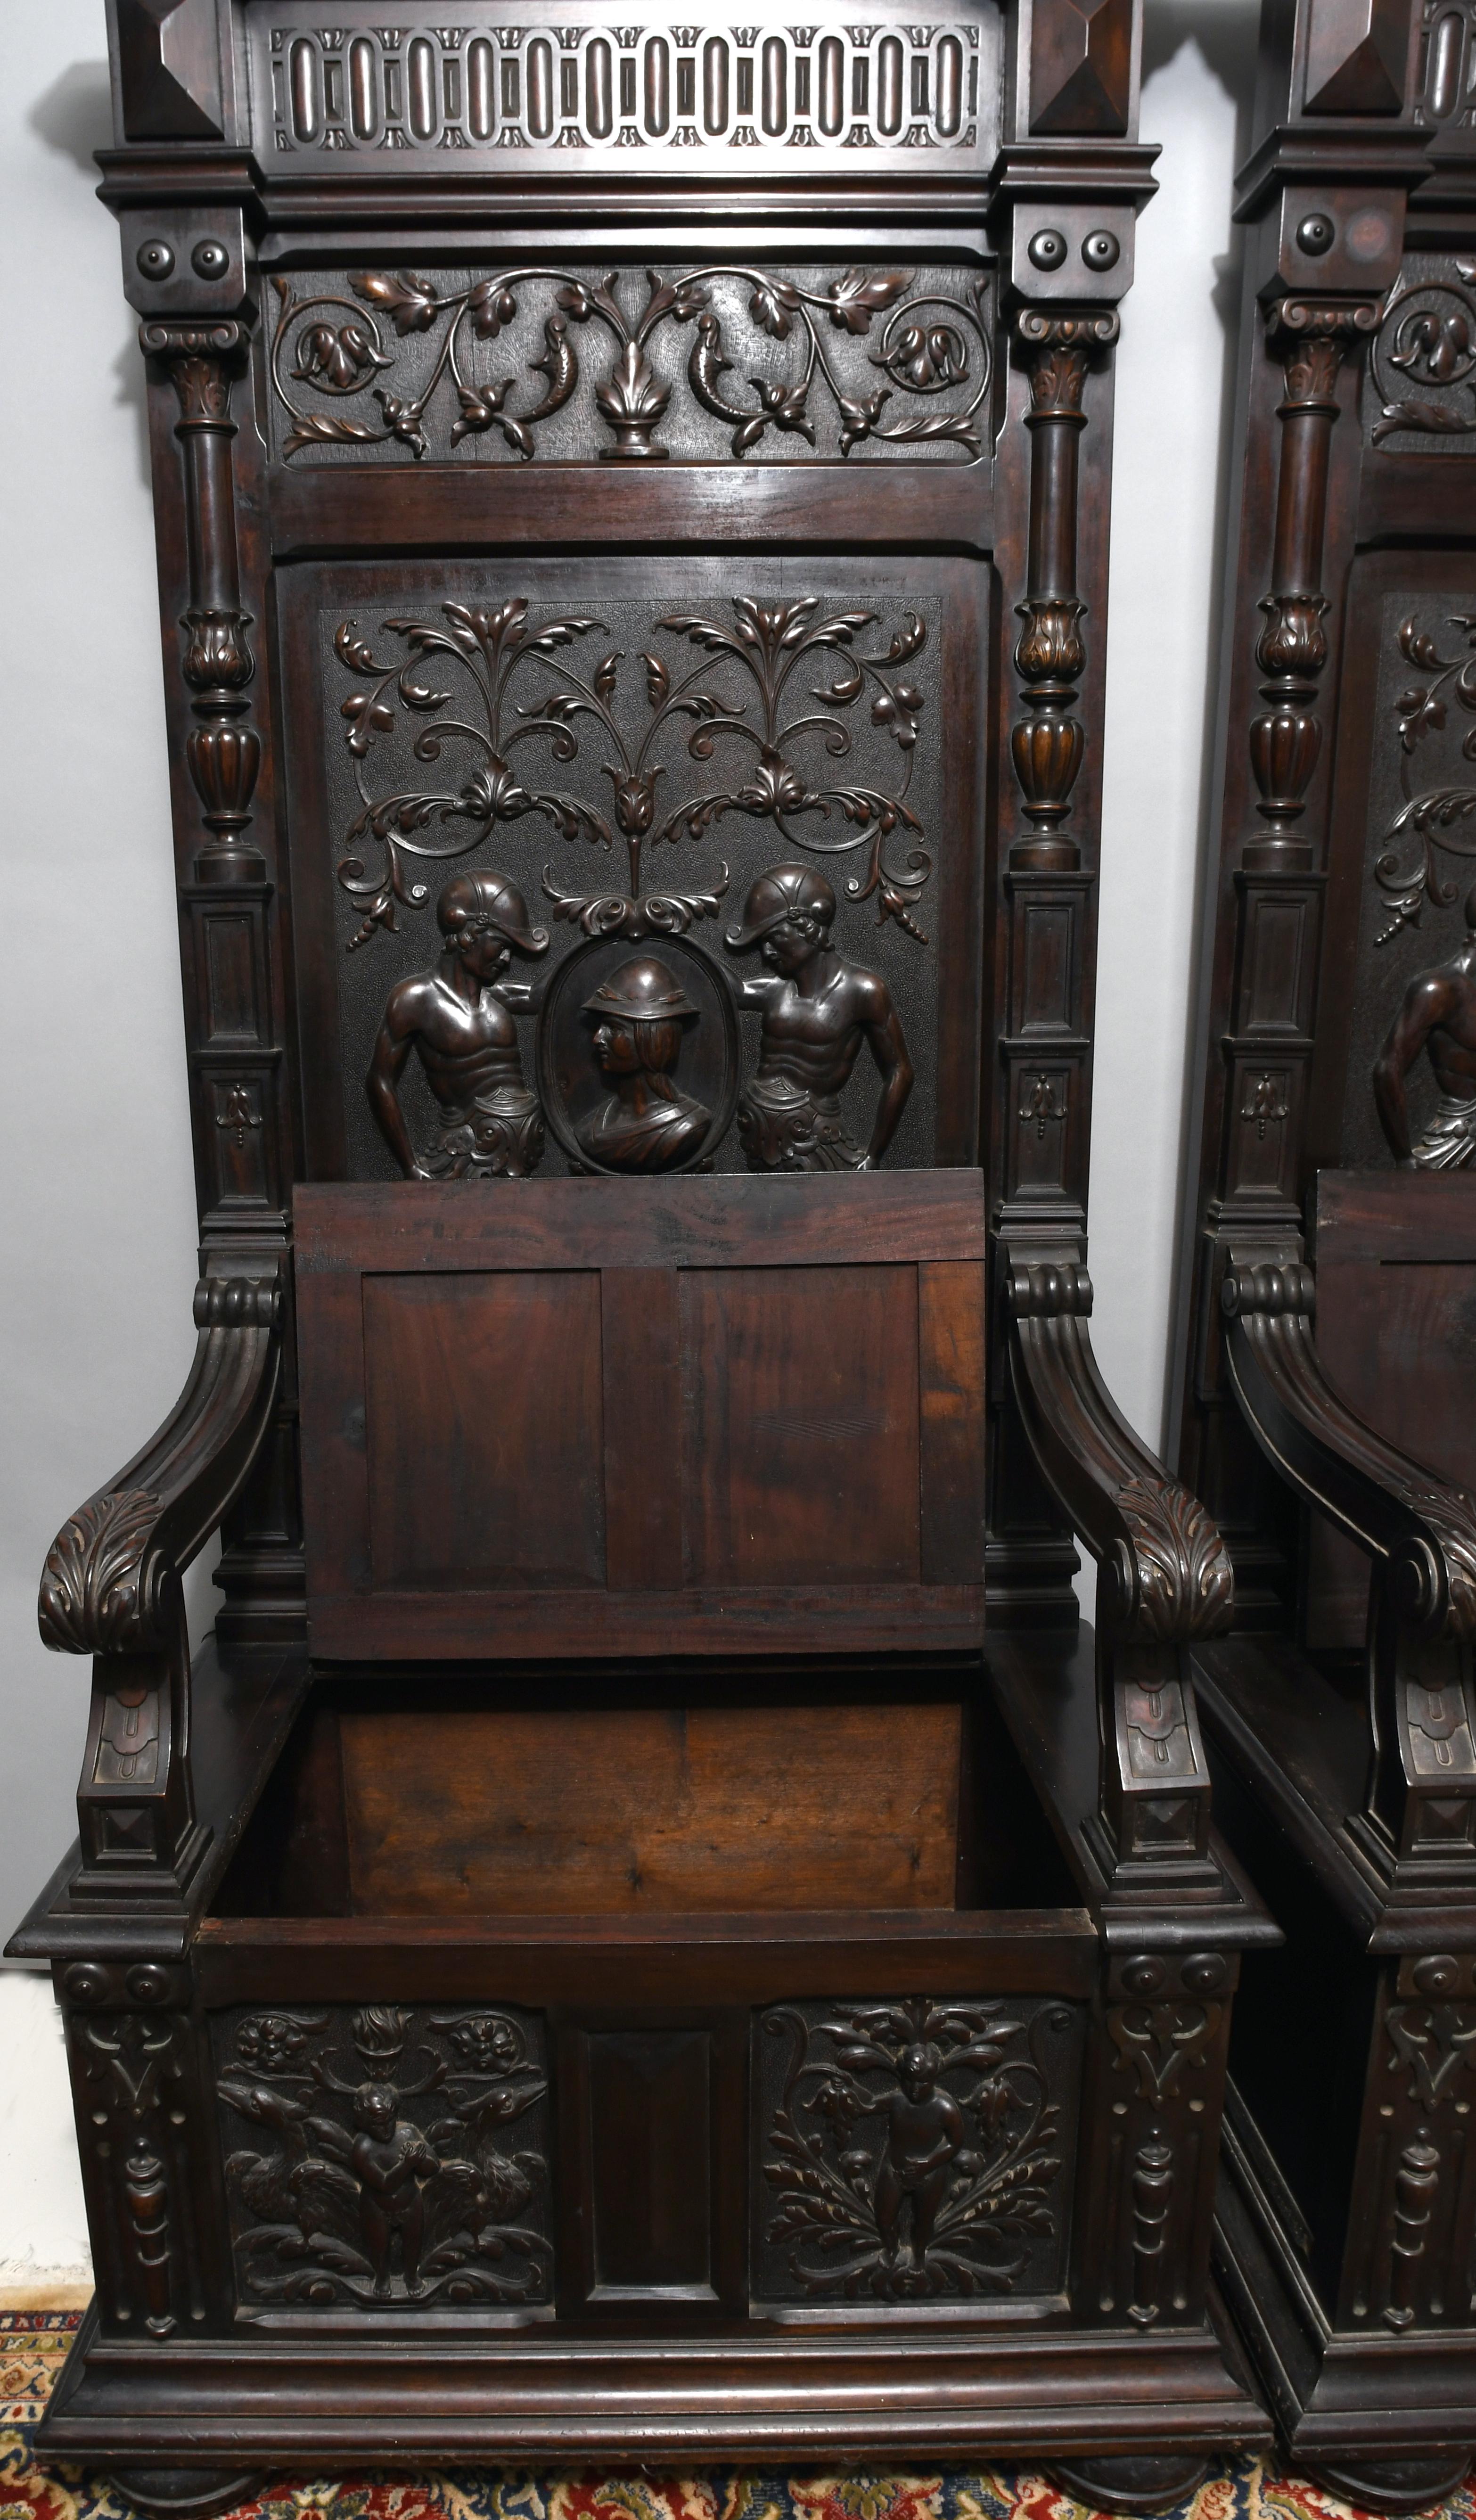 These thrones are typical examples of the Renaissance Revival era. They show deep carving, reliefs of mythological figures with Greek helmets, and foliage; plus molded cornices and fine spindles. There are a secret compartment under the lift lid
of